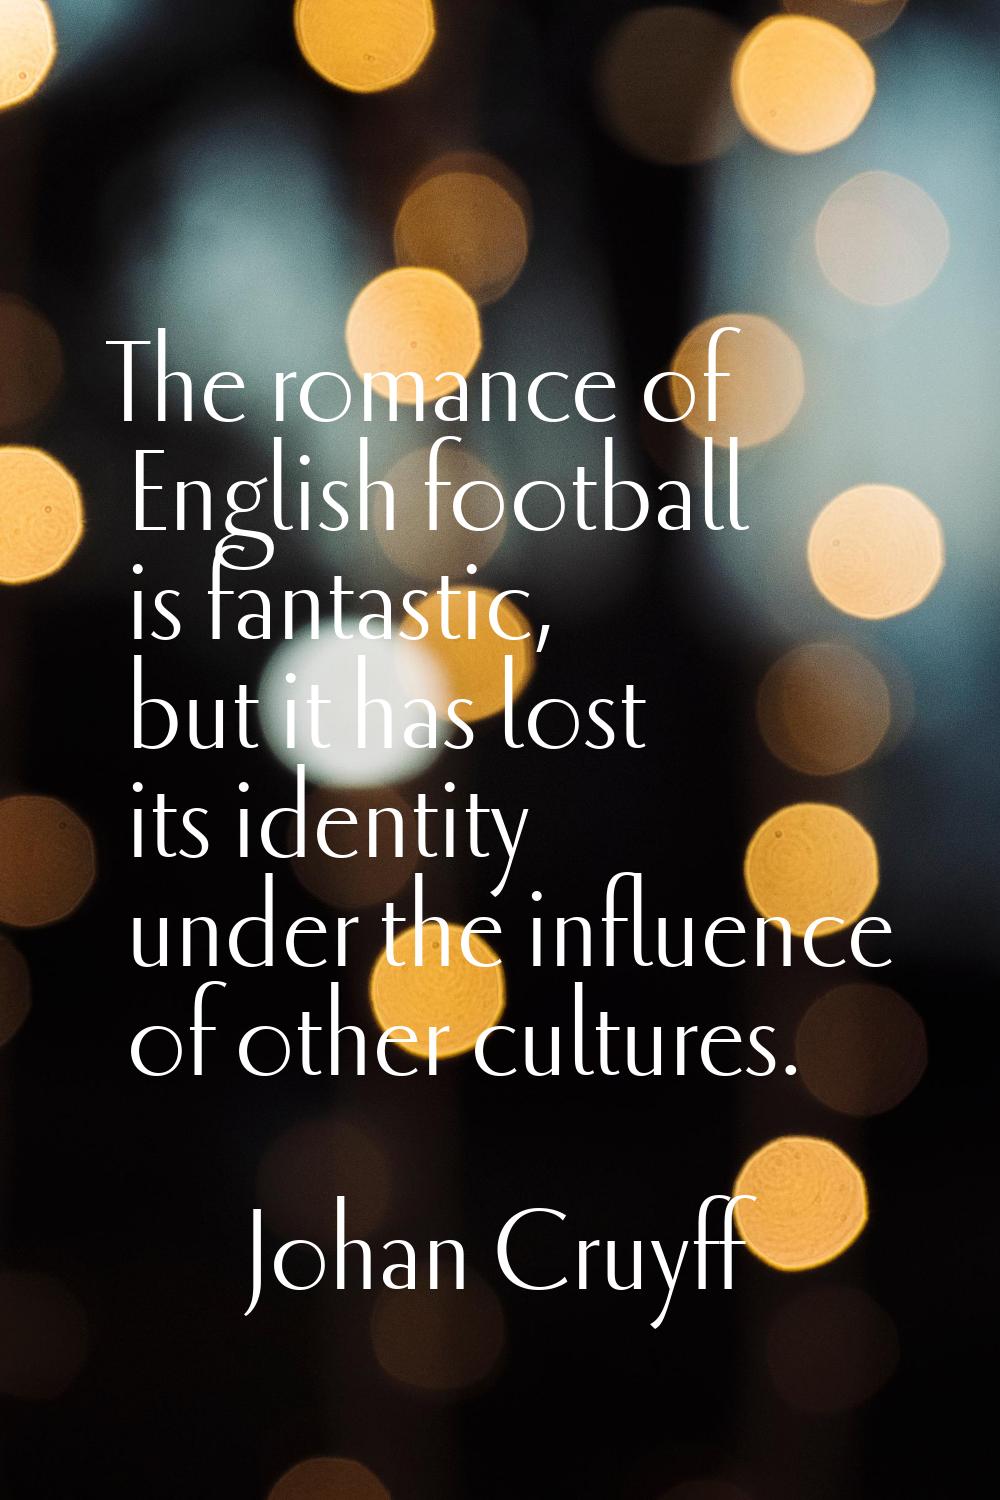 The romance of English football is fantastic, but it has lost its identity under the influence of o